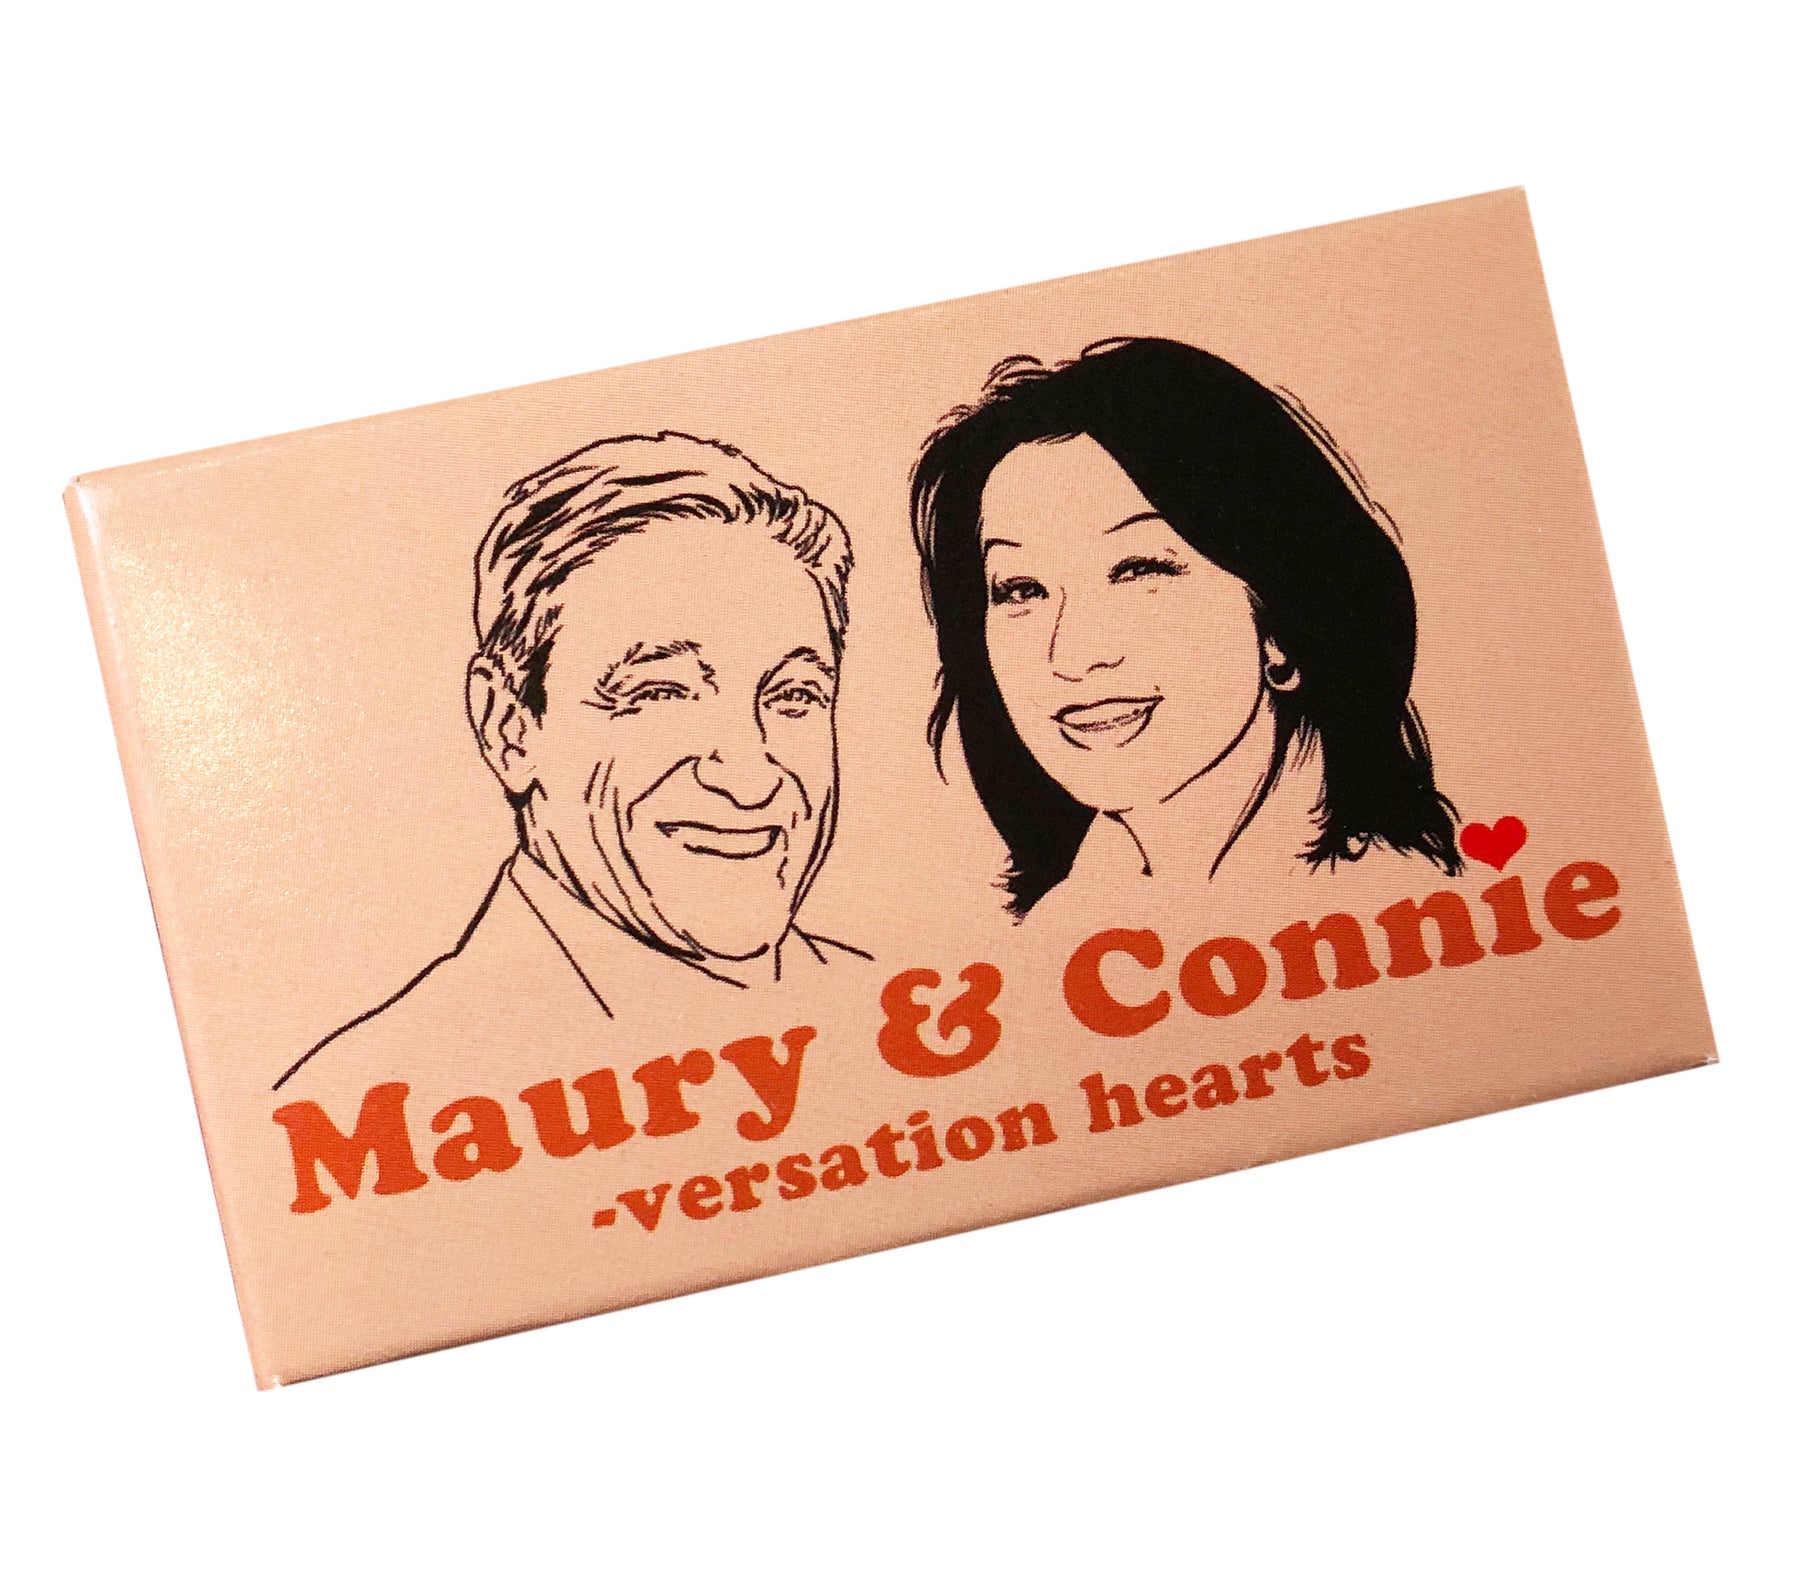 Maury & Connie-versation hearts (four boxes)